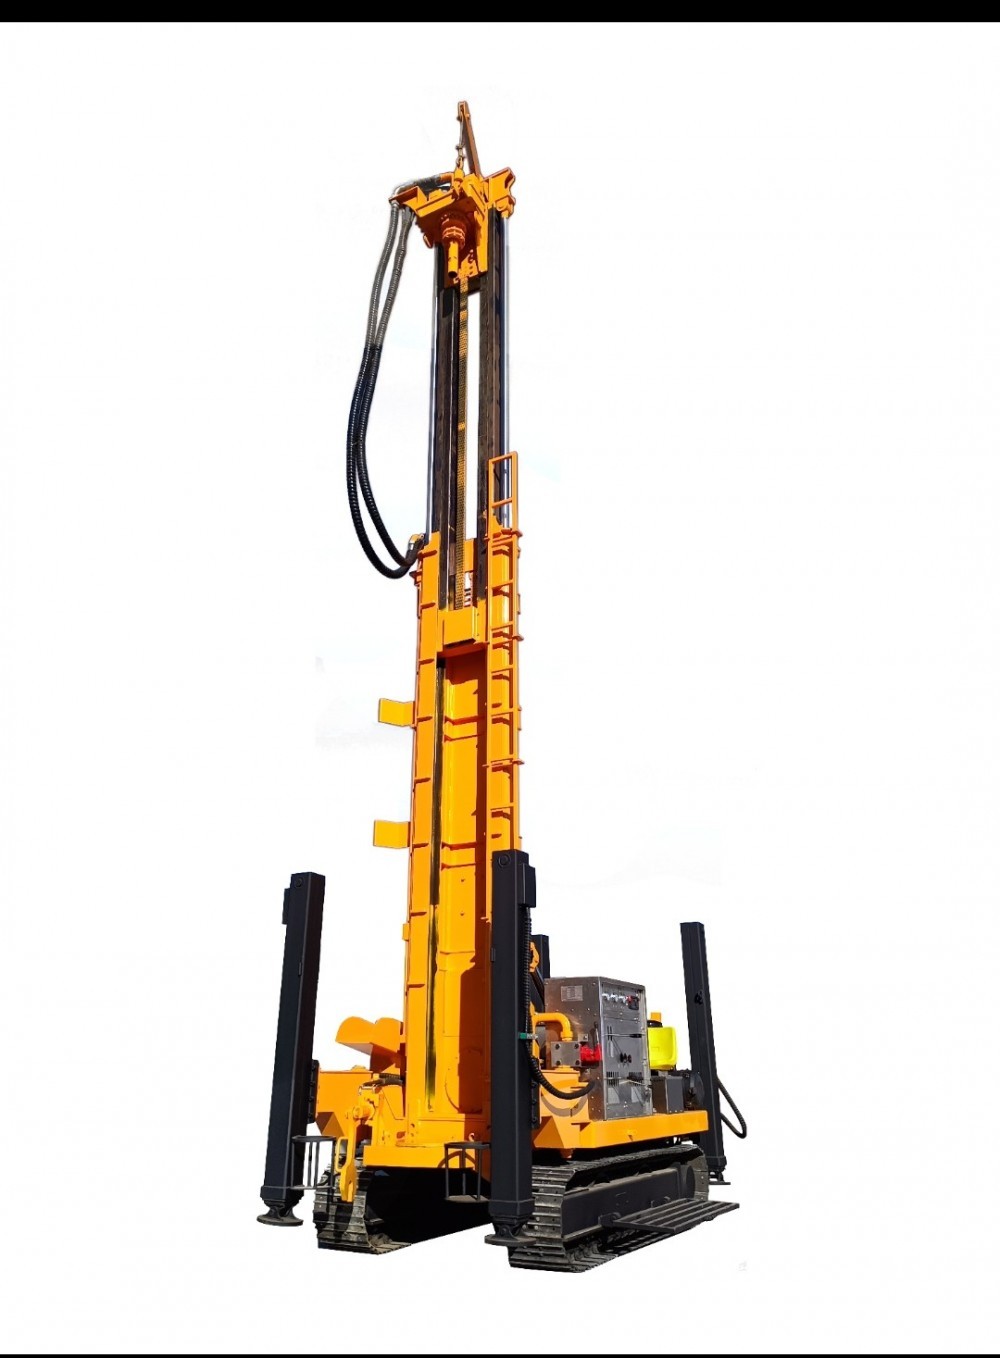 Water well drilling rig and core exploration